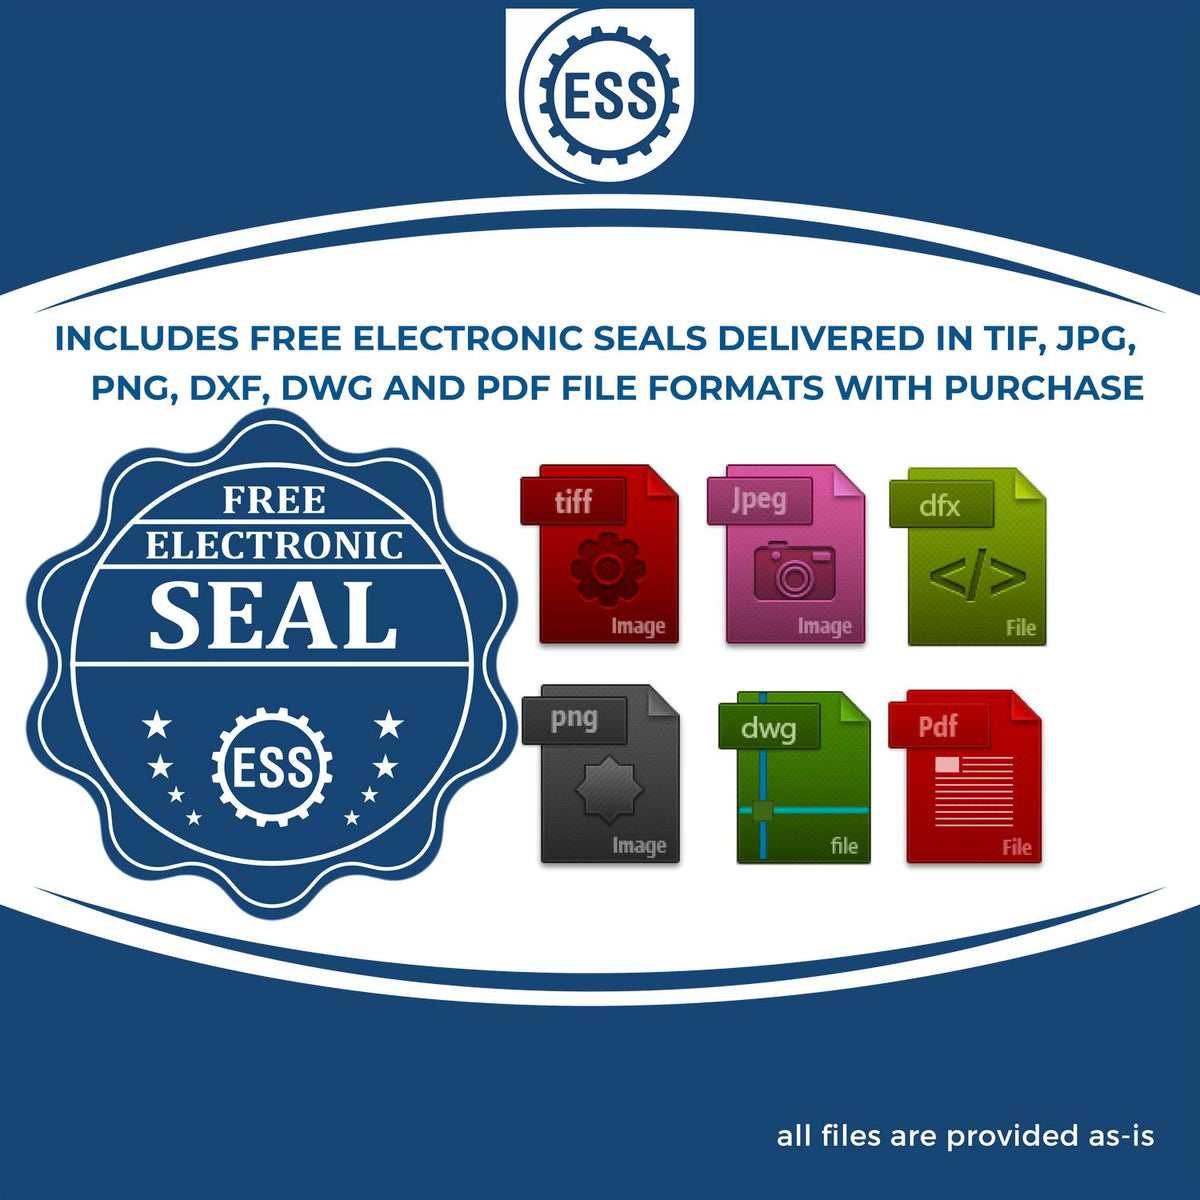 An infographic for the free electronic seal for the MaxLight Premium Pre-Inked North Carolina State Seal Notarial Stamp illustrating the different file type icons such as DXF, DWG, TIF, JPG and PNG.